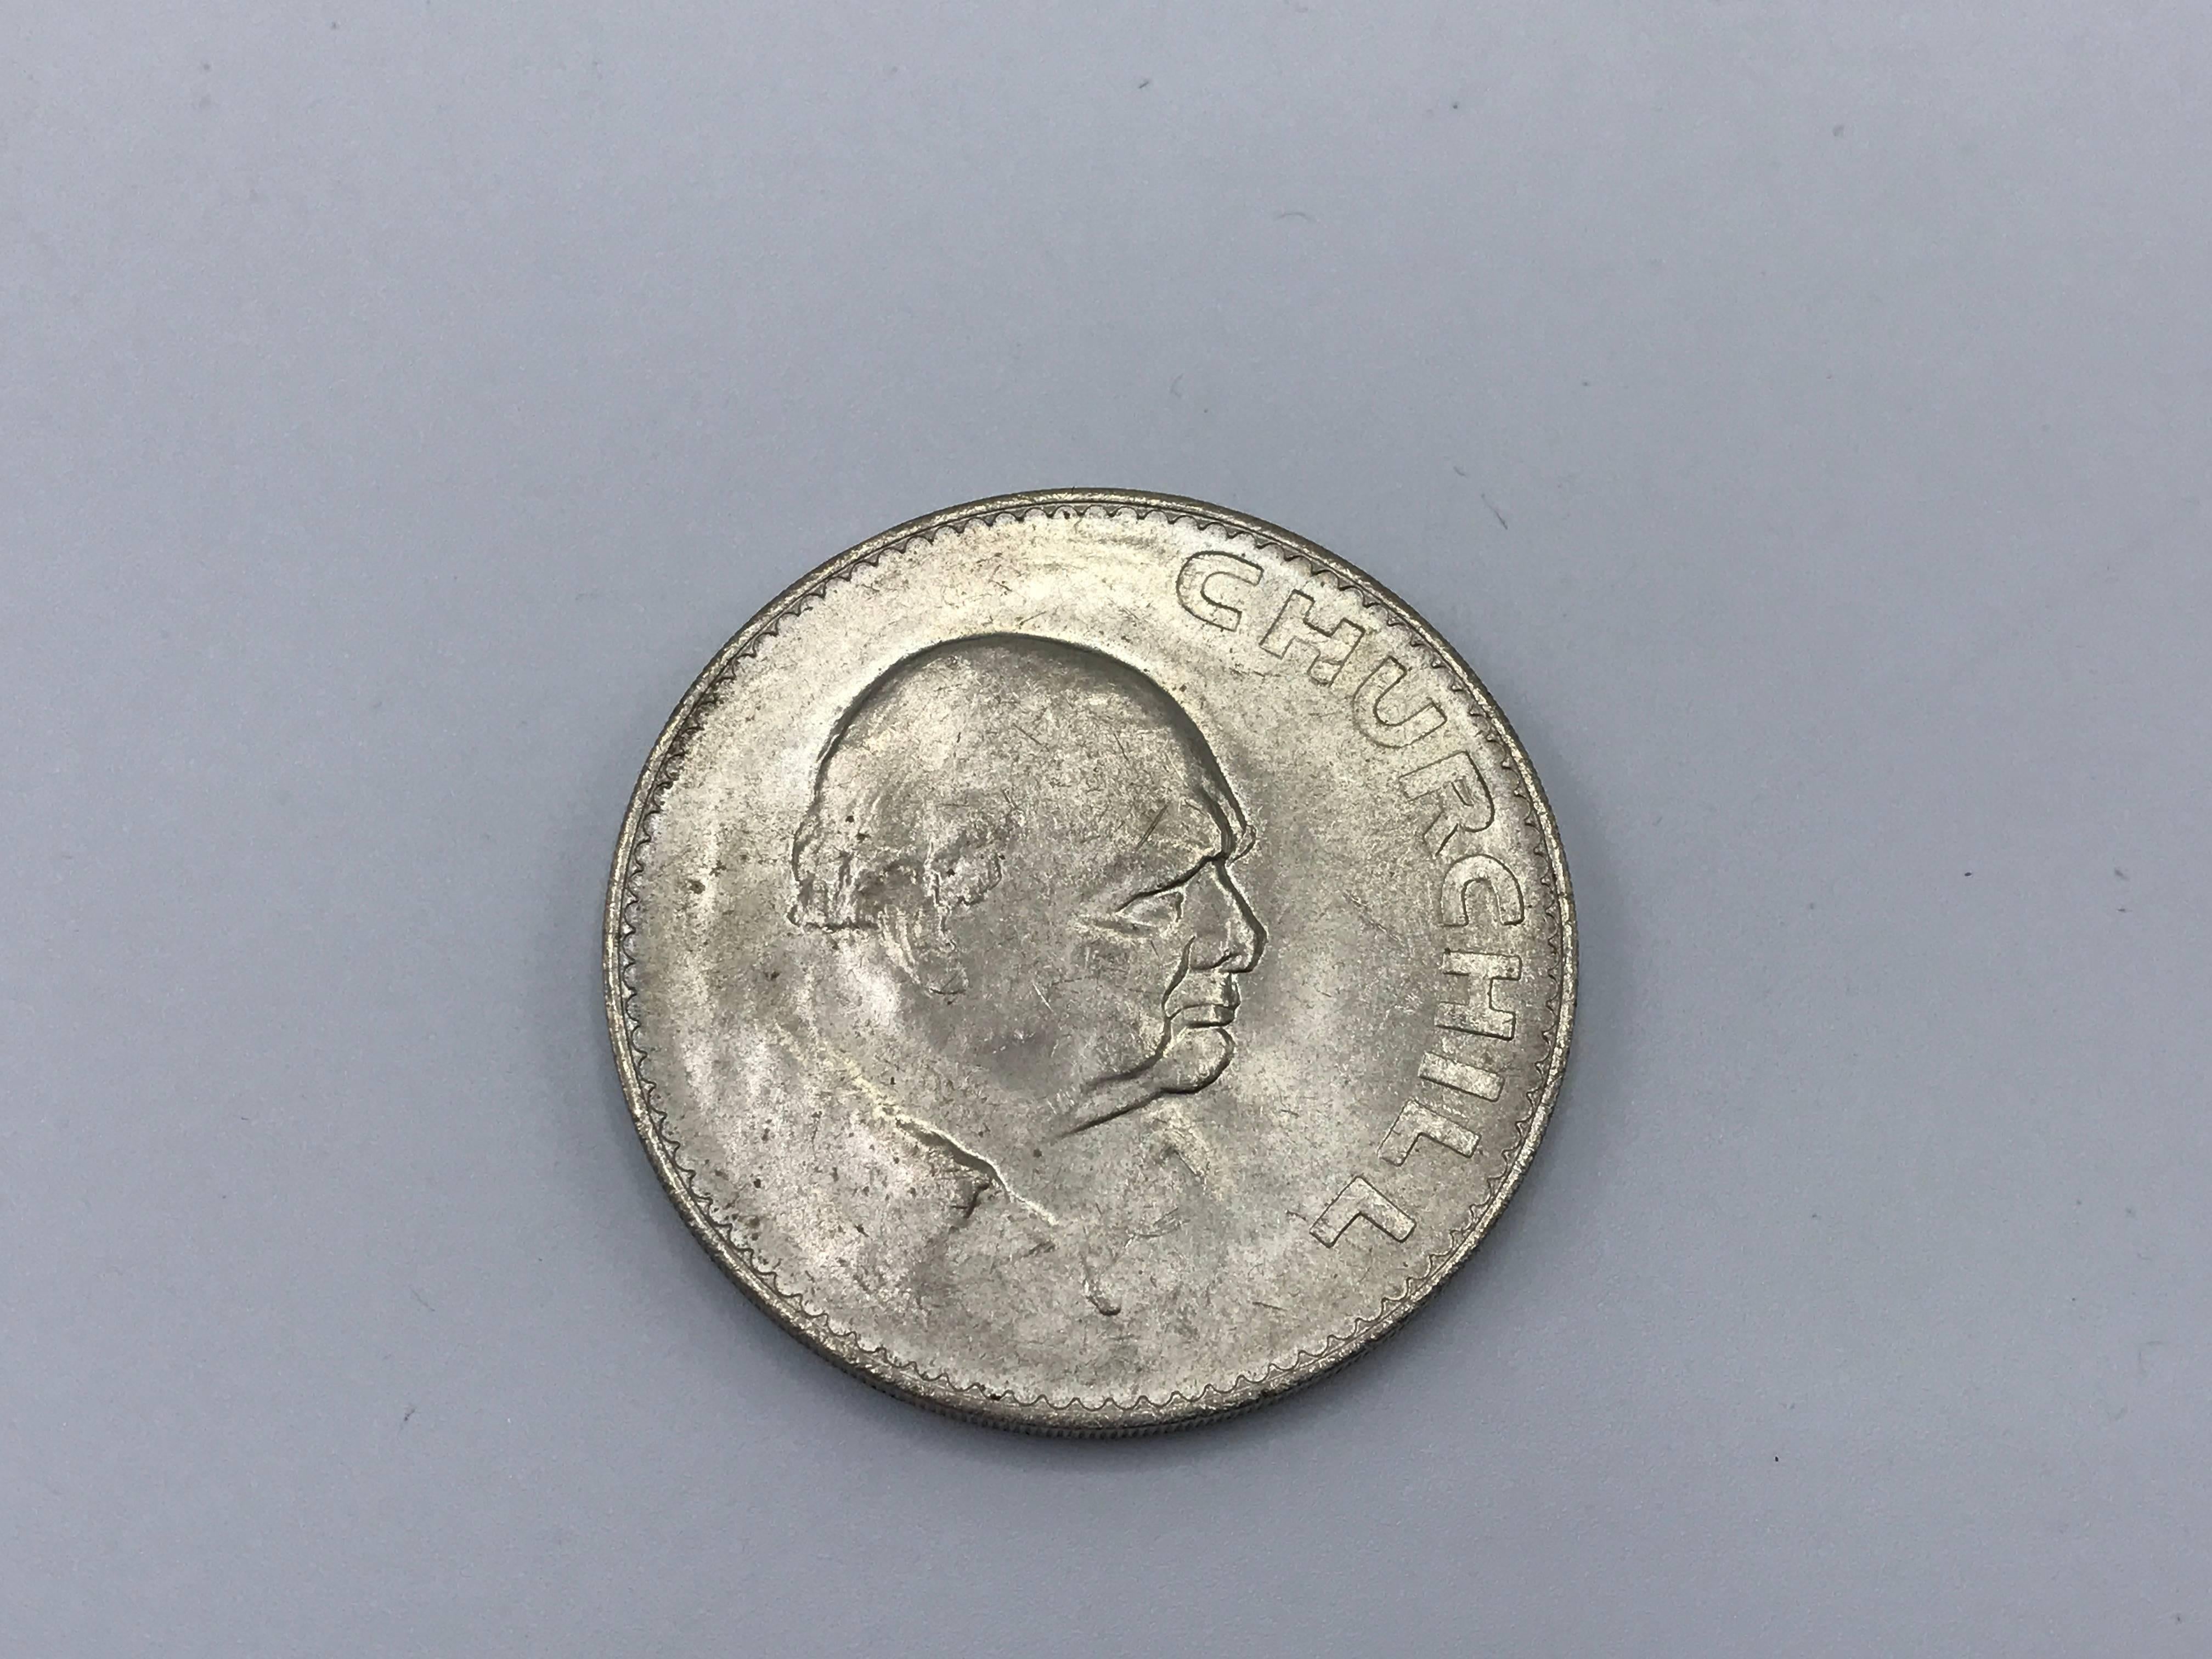 Offered is a rare and highly collectable, Elizabeth II 1965 Churchill commemorative crown coin. The 1965 crown coin was minted to commemorate Sir Winston Churchill, who died 24th January 1965. The crown was struck in cupro-nickel and depicts